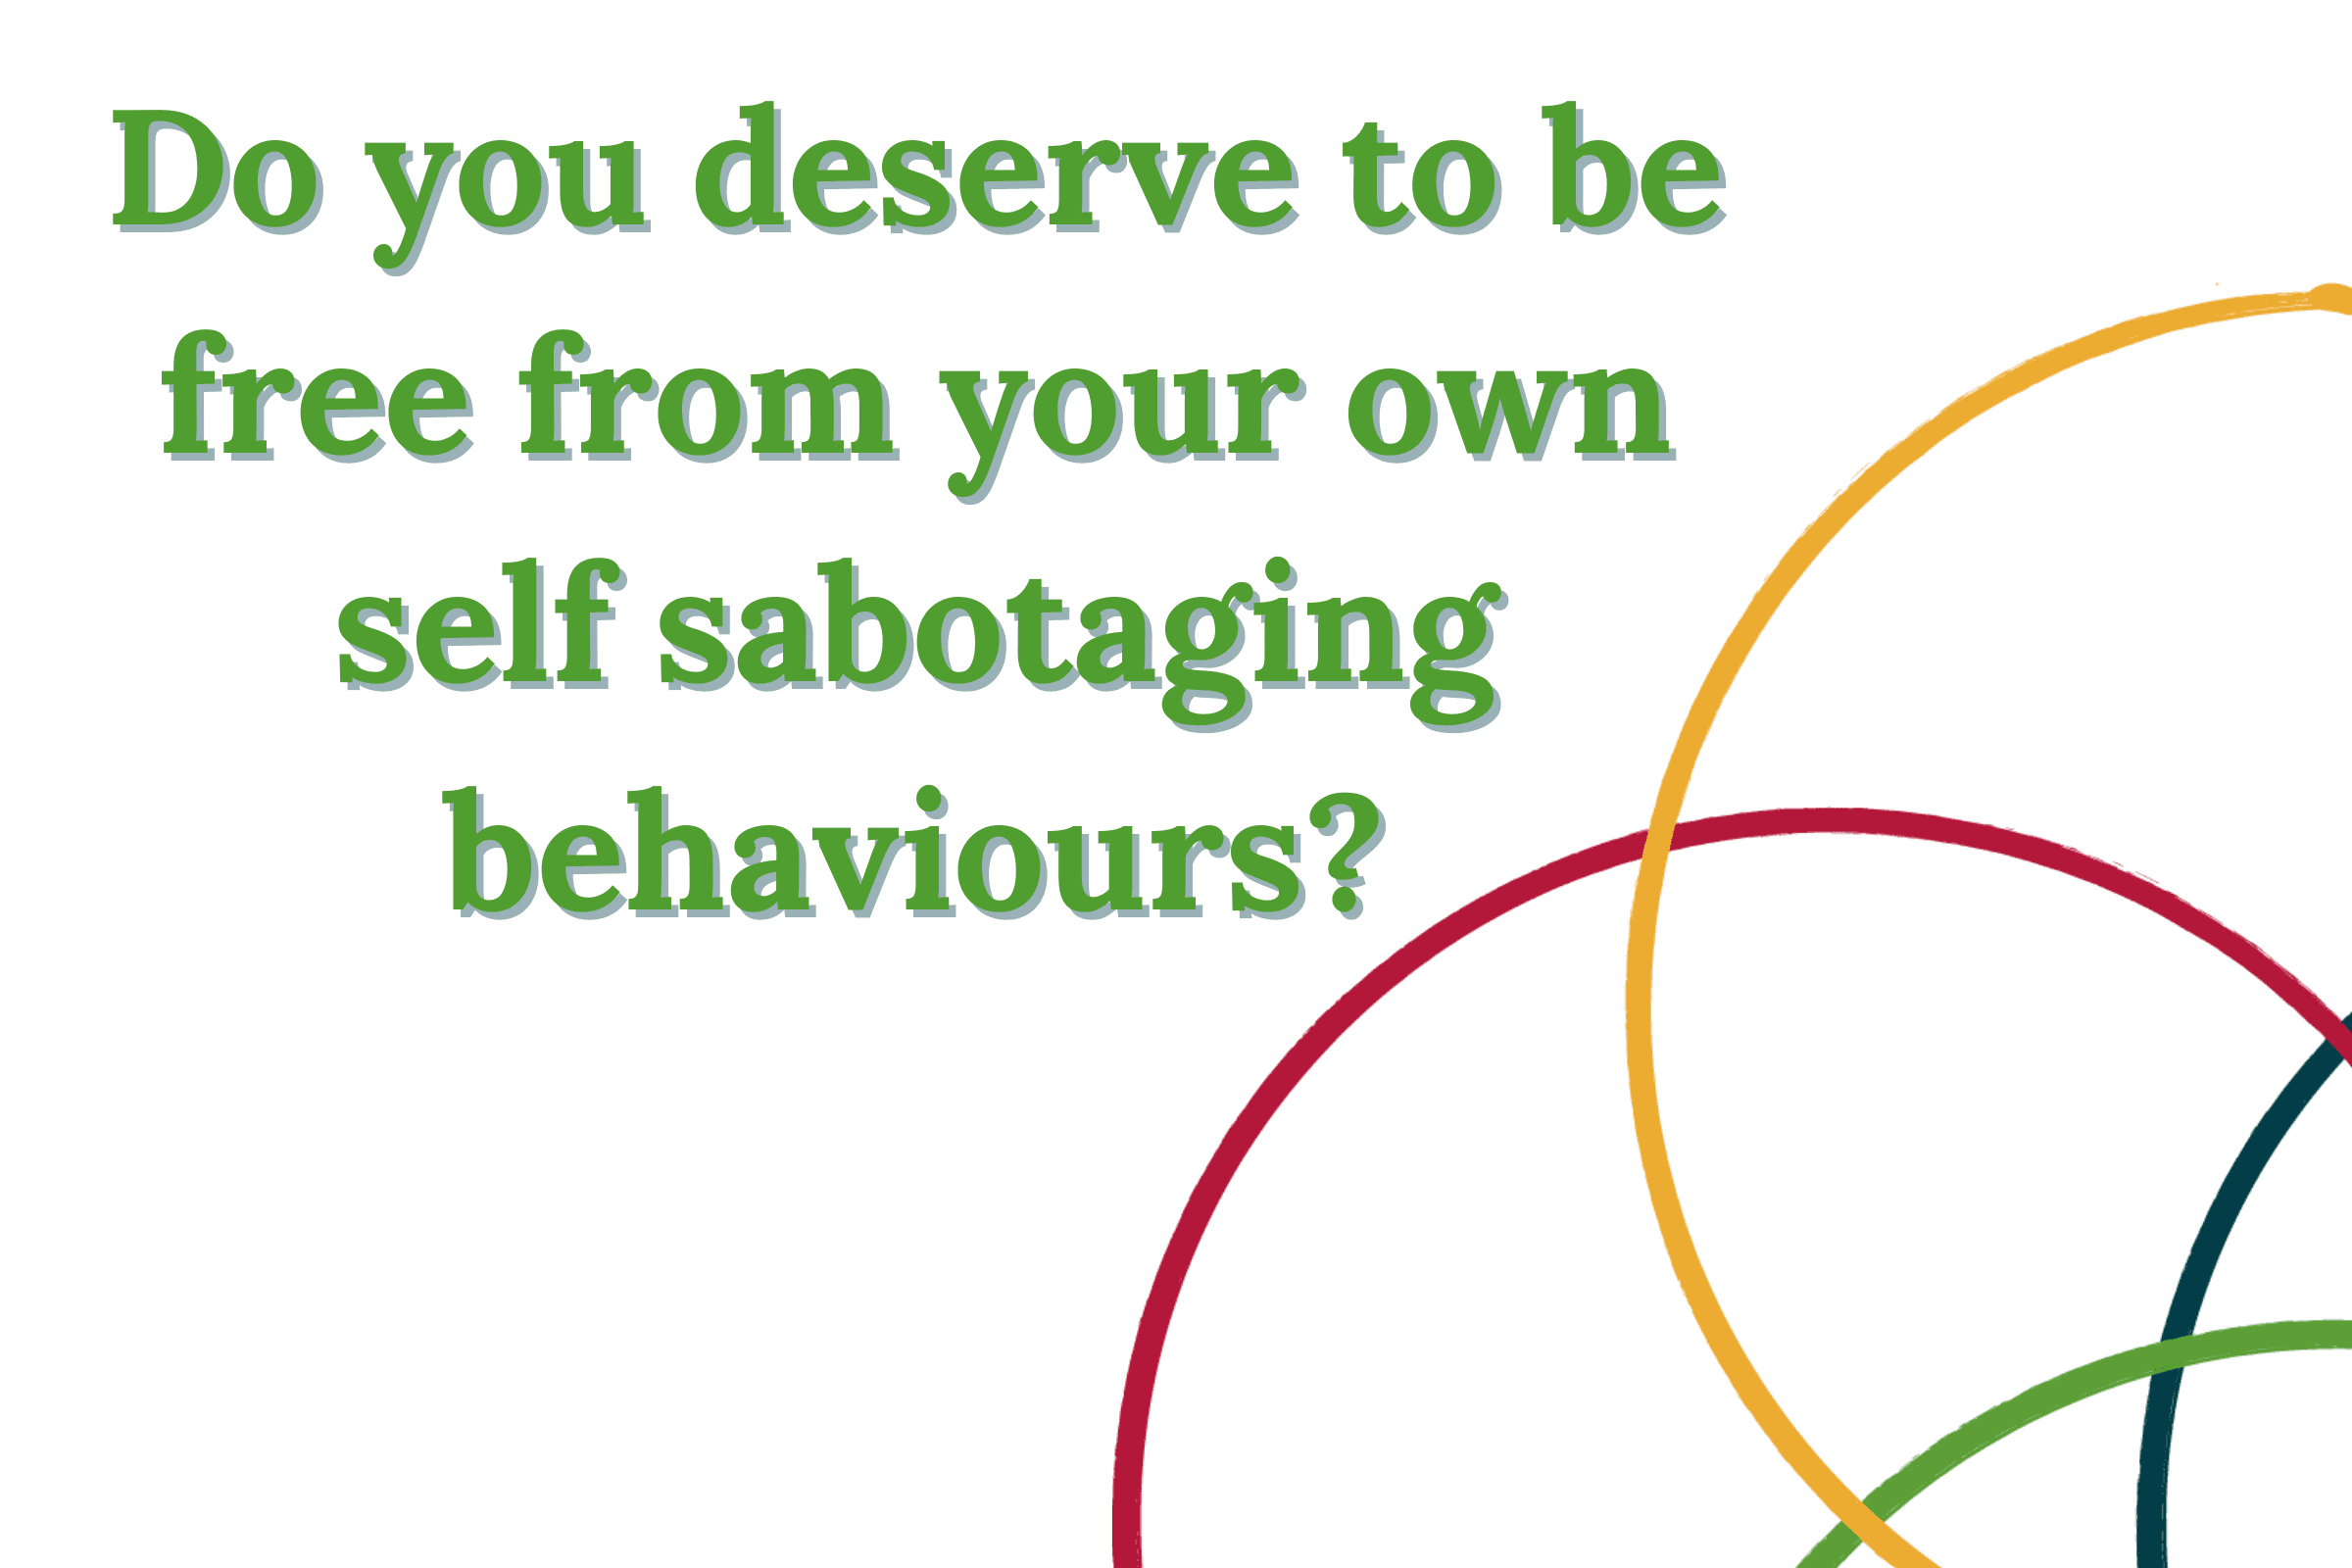 Do you deserve to be free from your own self sabotaging behaviours?